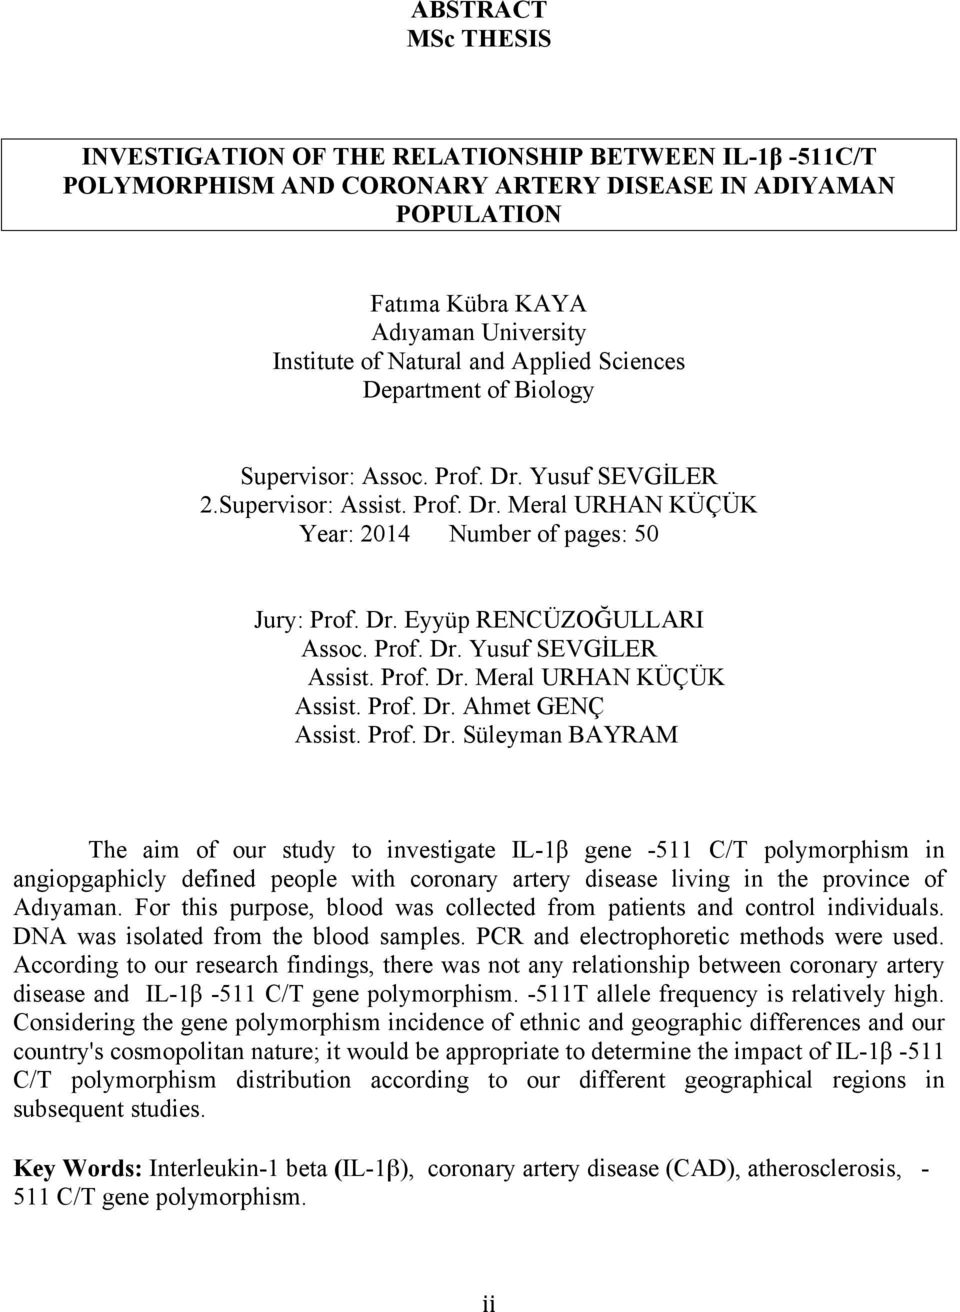 Prof. Dr. Yusuf SEVGİLER Assist. Prof. Dr. Meral URHAN KÜÇÜK Assist. Prof. Dr. Ahmet GENÇ Assist. Prof. Dr. Süleyman BAYRAM The aim of our study to investigate IL-1β gene -511 C/T polymorphism in angiopgaphicly defined people with coronary artery disease living in the province of Adıyaman.